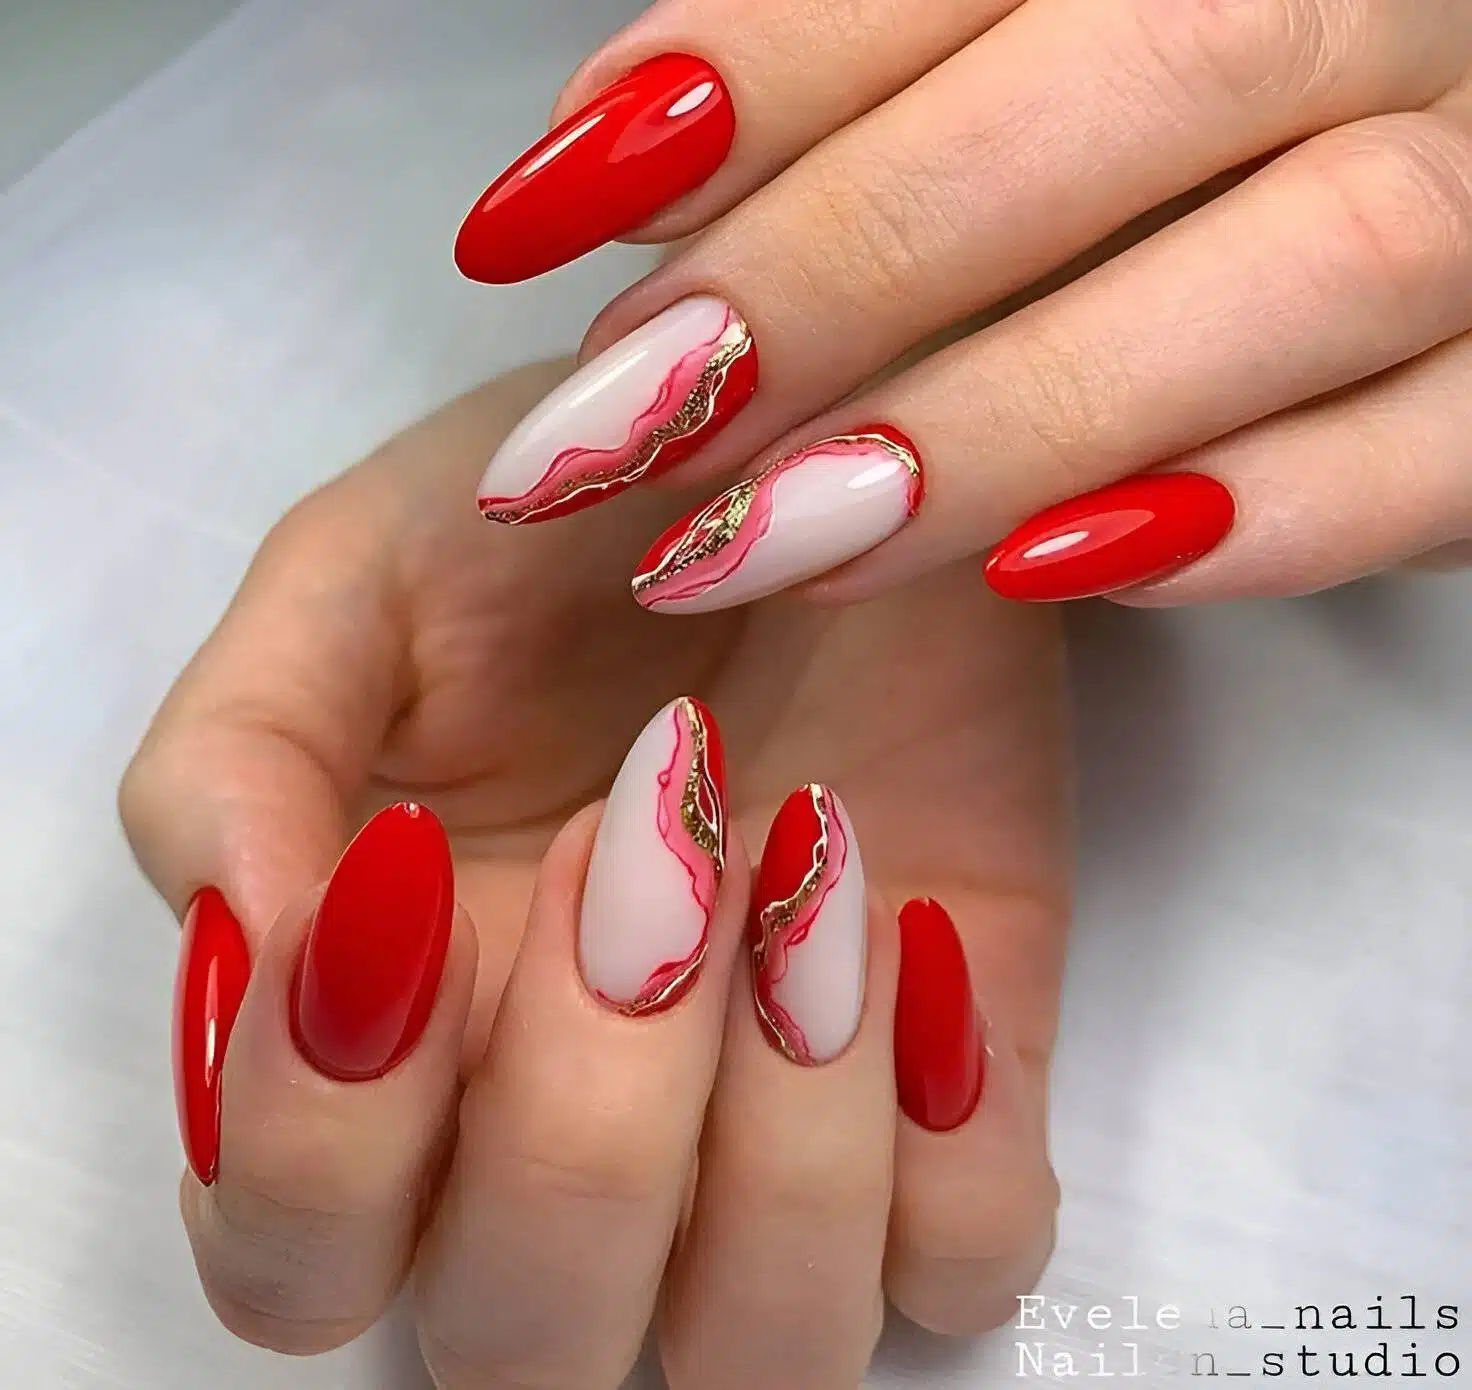 30 Red Nail Designs That Are The Epitome Of Feminine Beauty - 231